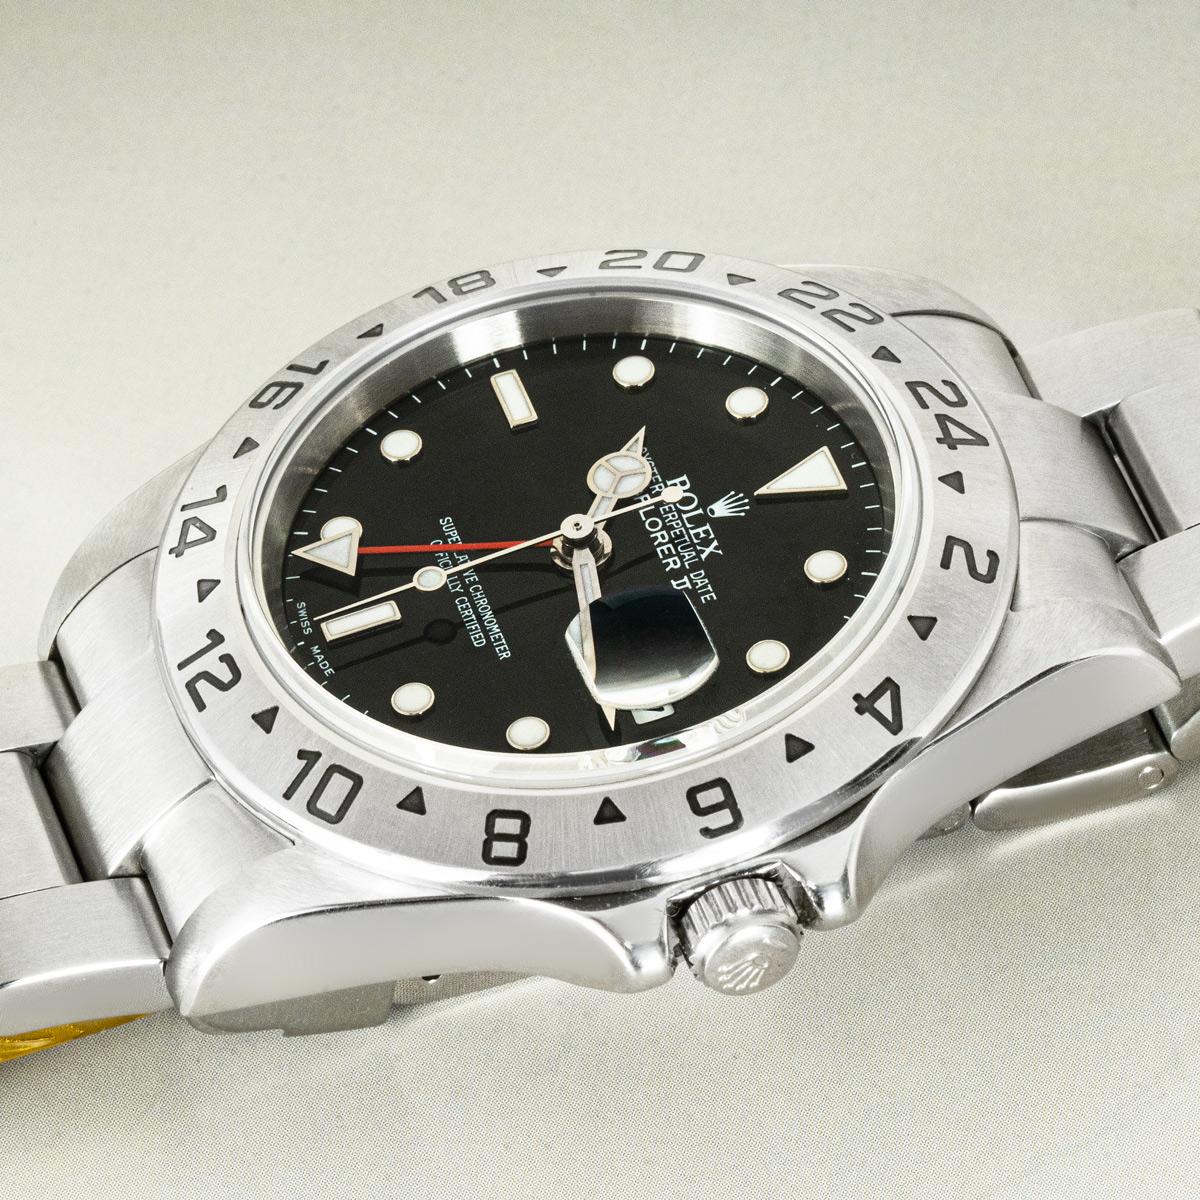 A 40mm Explorer II by Rolex in stainless steel. Features a black dial with a date aperture and a red 24-hour hand, complemented by fixed a stainless steel fixed with a 24-hour display. Fitted with a sapphire glass, a self-winding automatic movement,